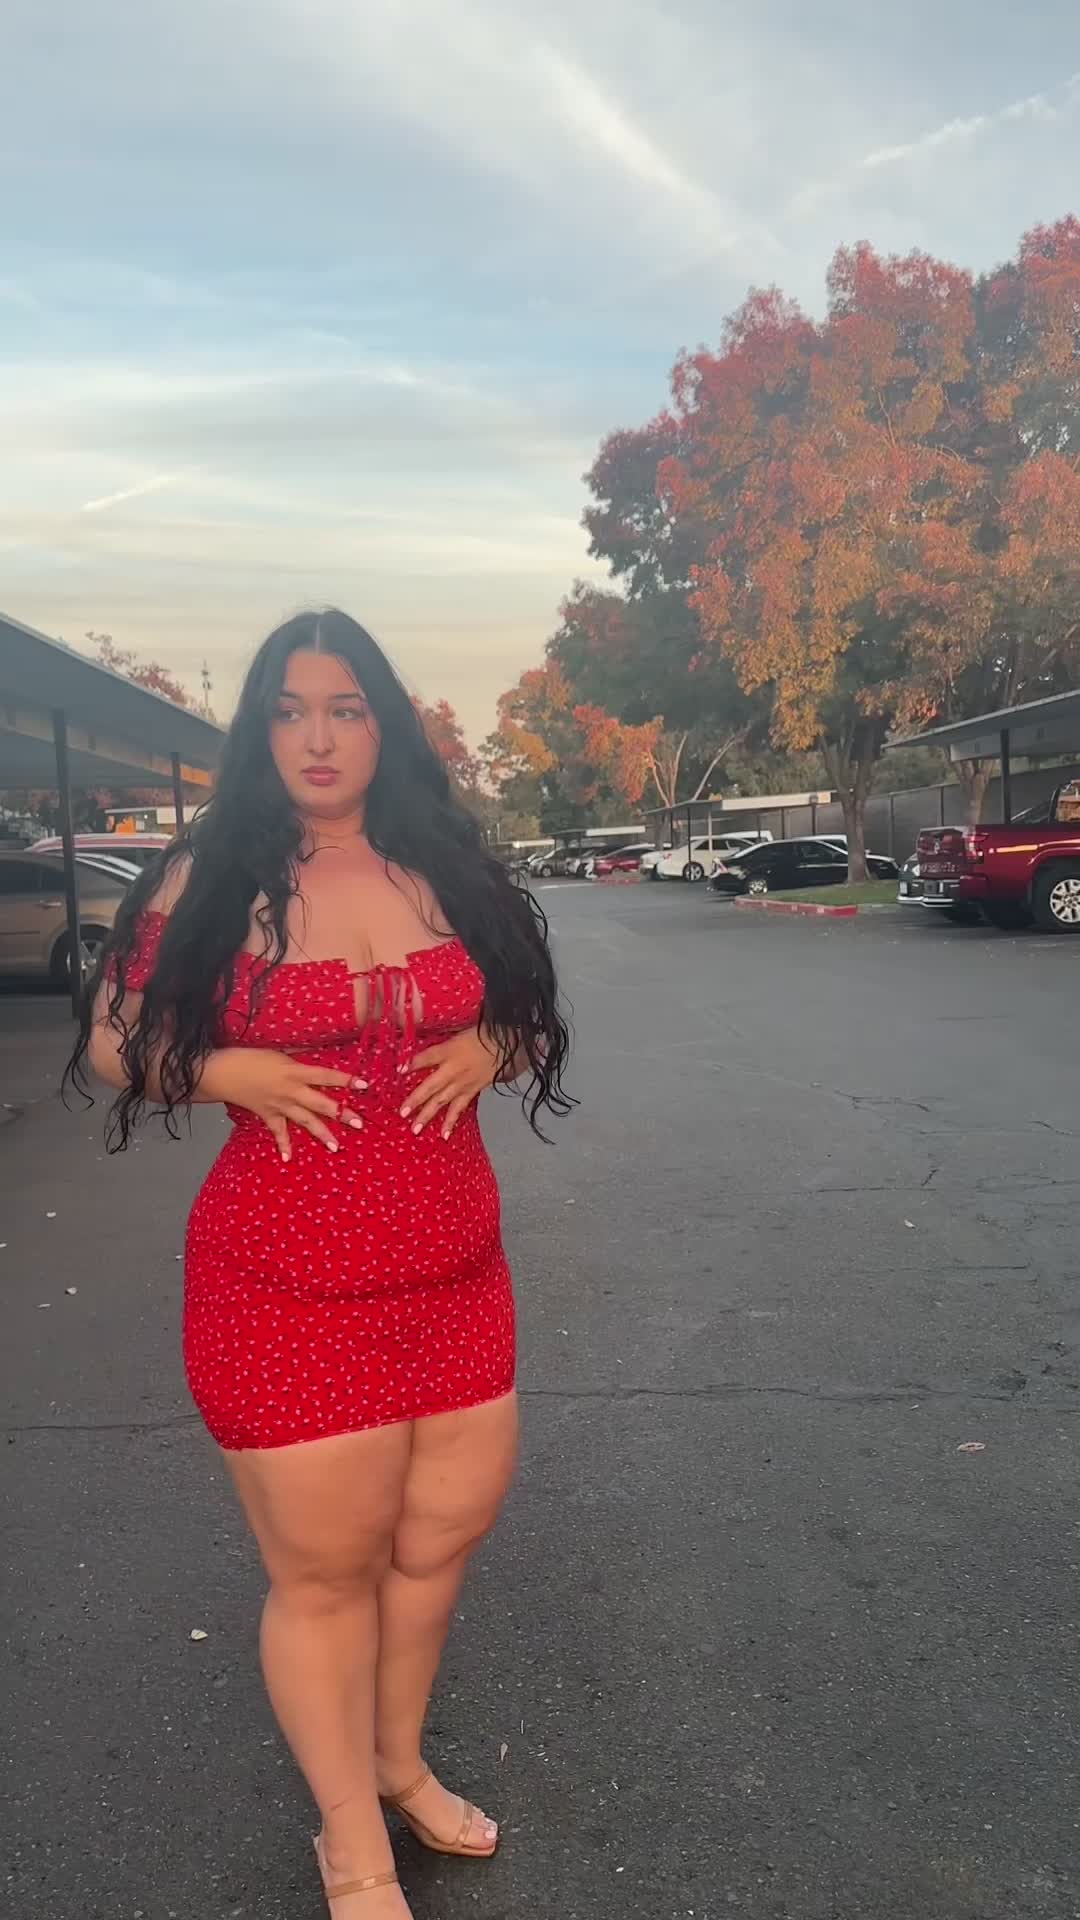 @Gymthickmami